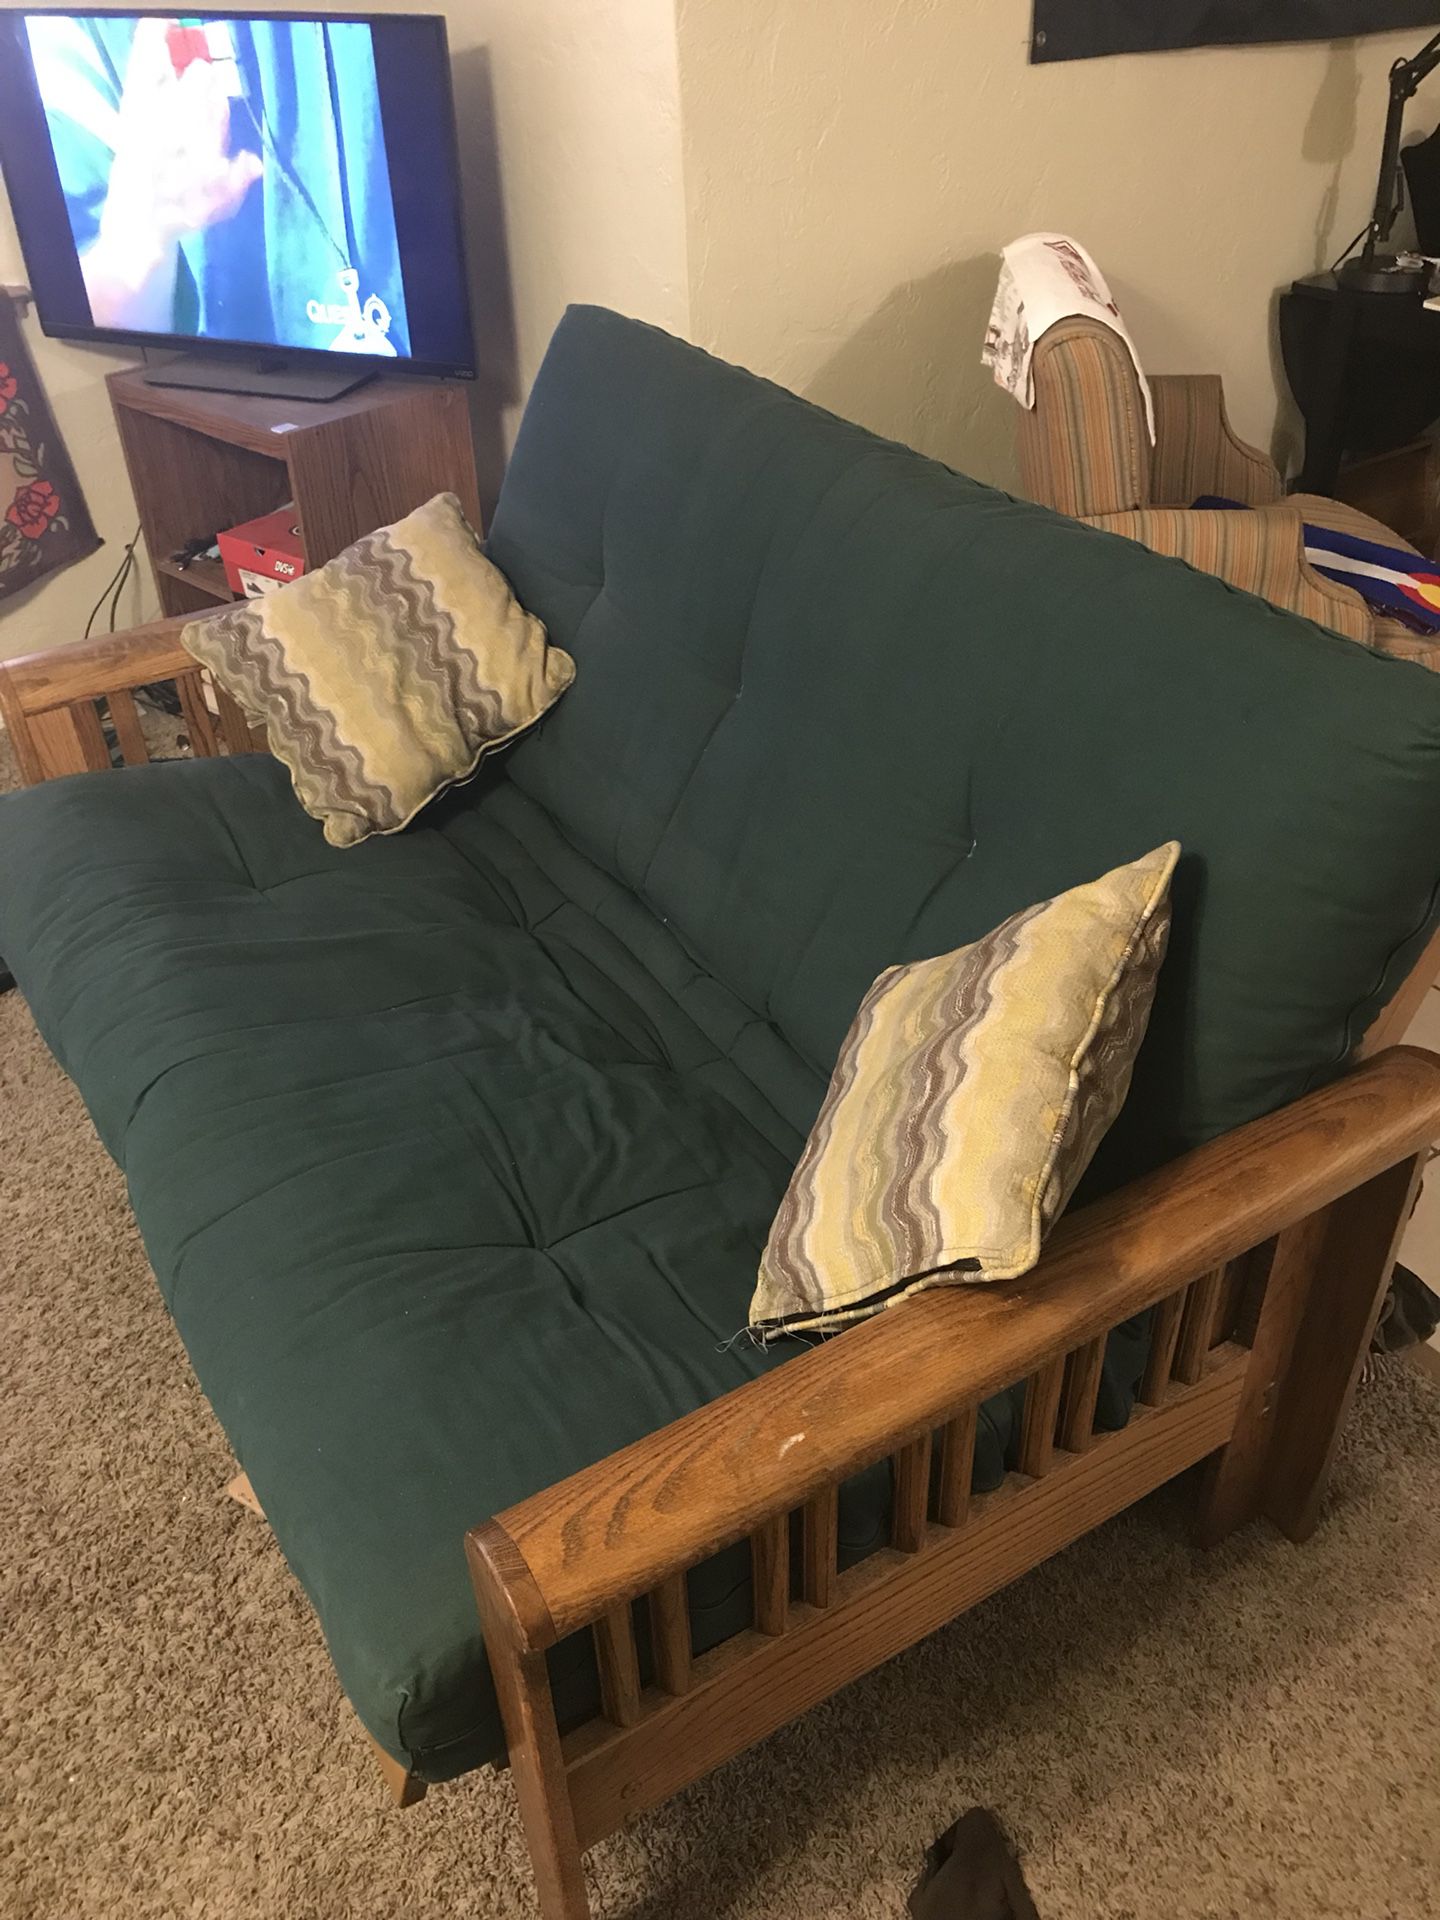 Futon couch in great condition